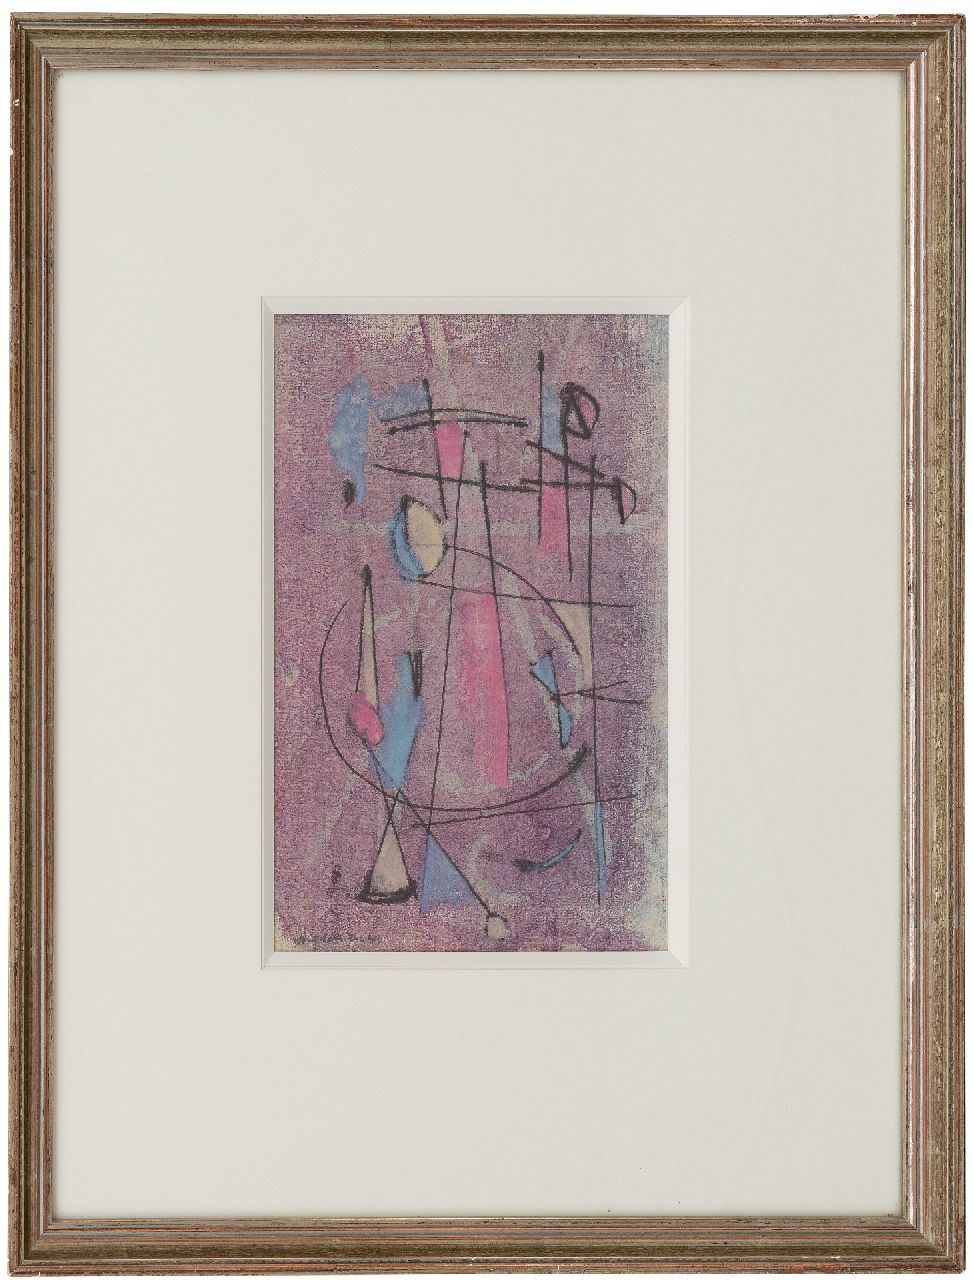 Strijbosch W.  | Wim Strijbosch | Watercolours and drawings offered for sale | Abstract composition, ink on paper 25.0 x 17.0 cm, signed l.l. and dated '49